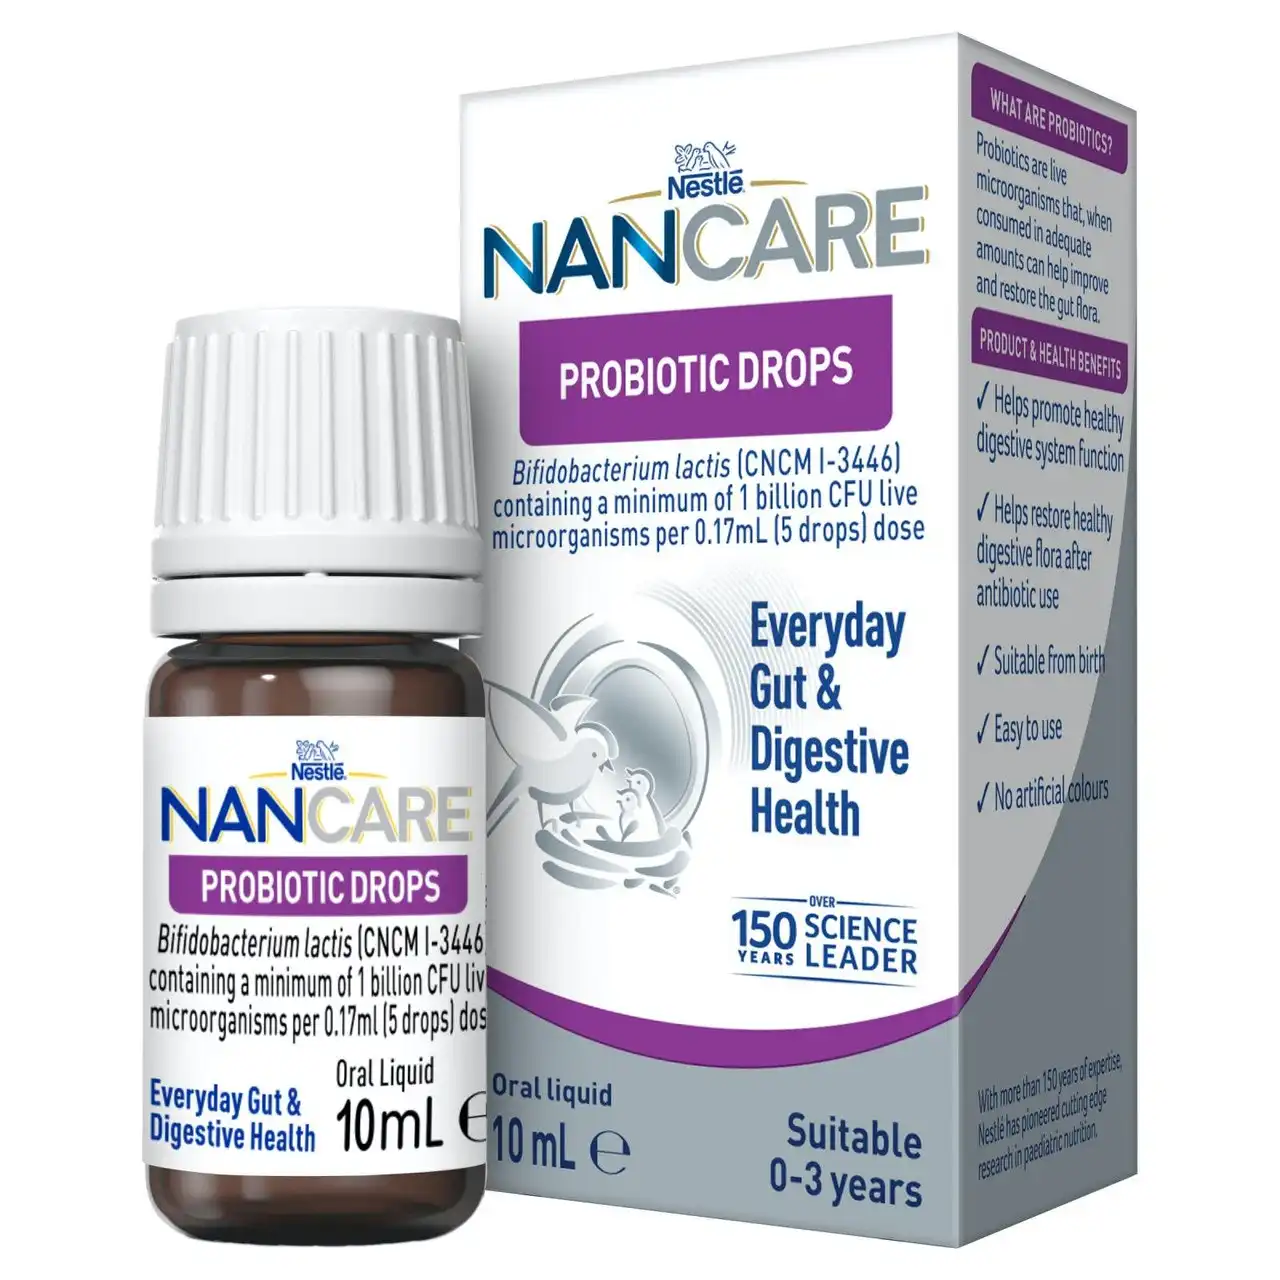 Nestle NAN CARE Probiotic Drops For Everyday Gut & Digestive Health 10mL